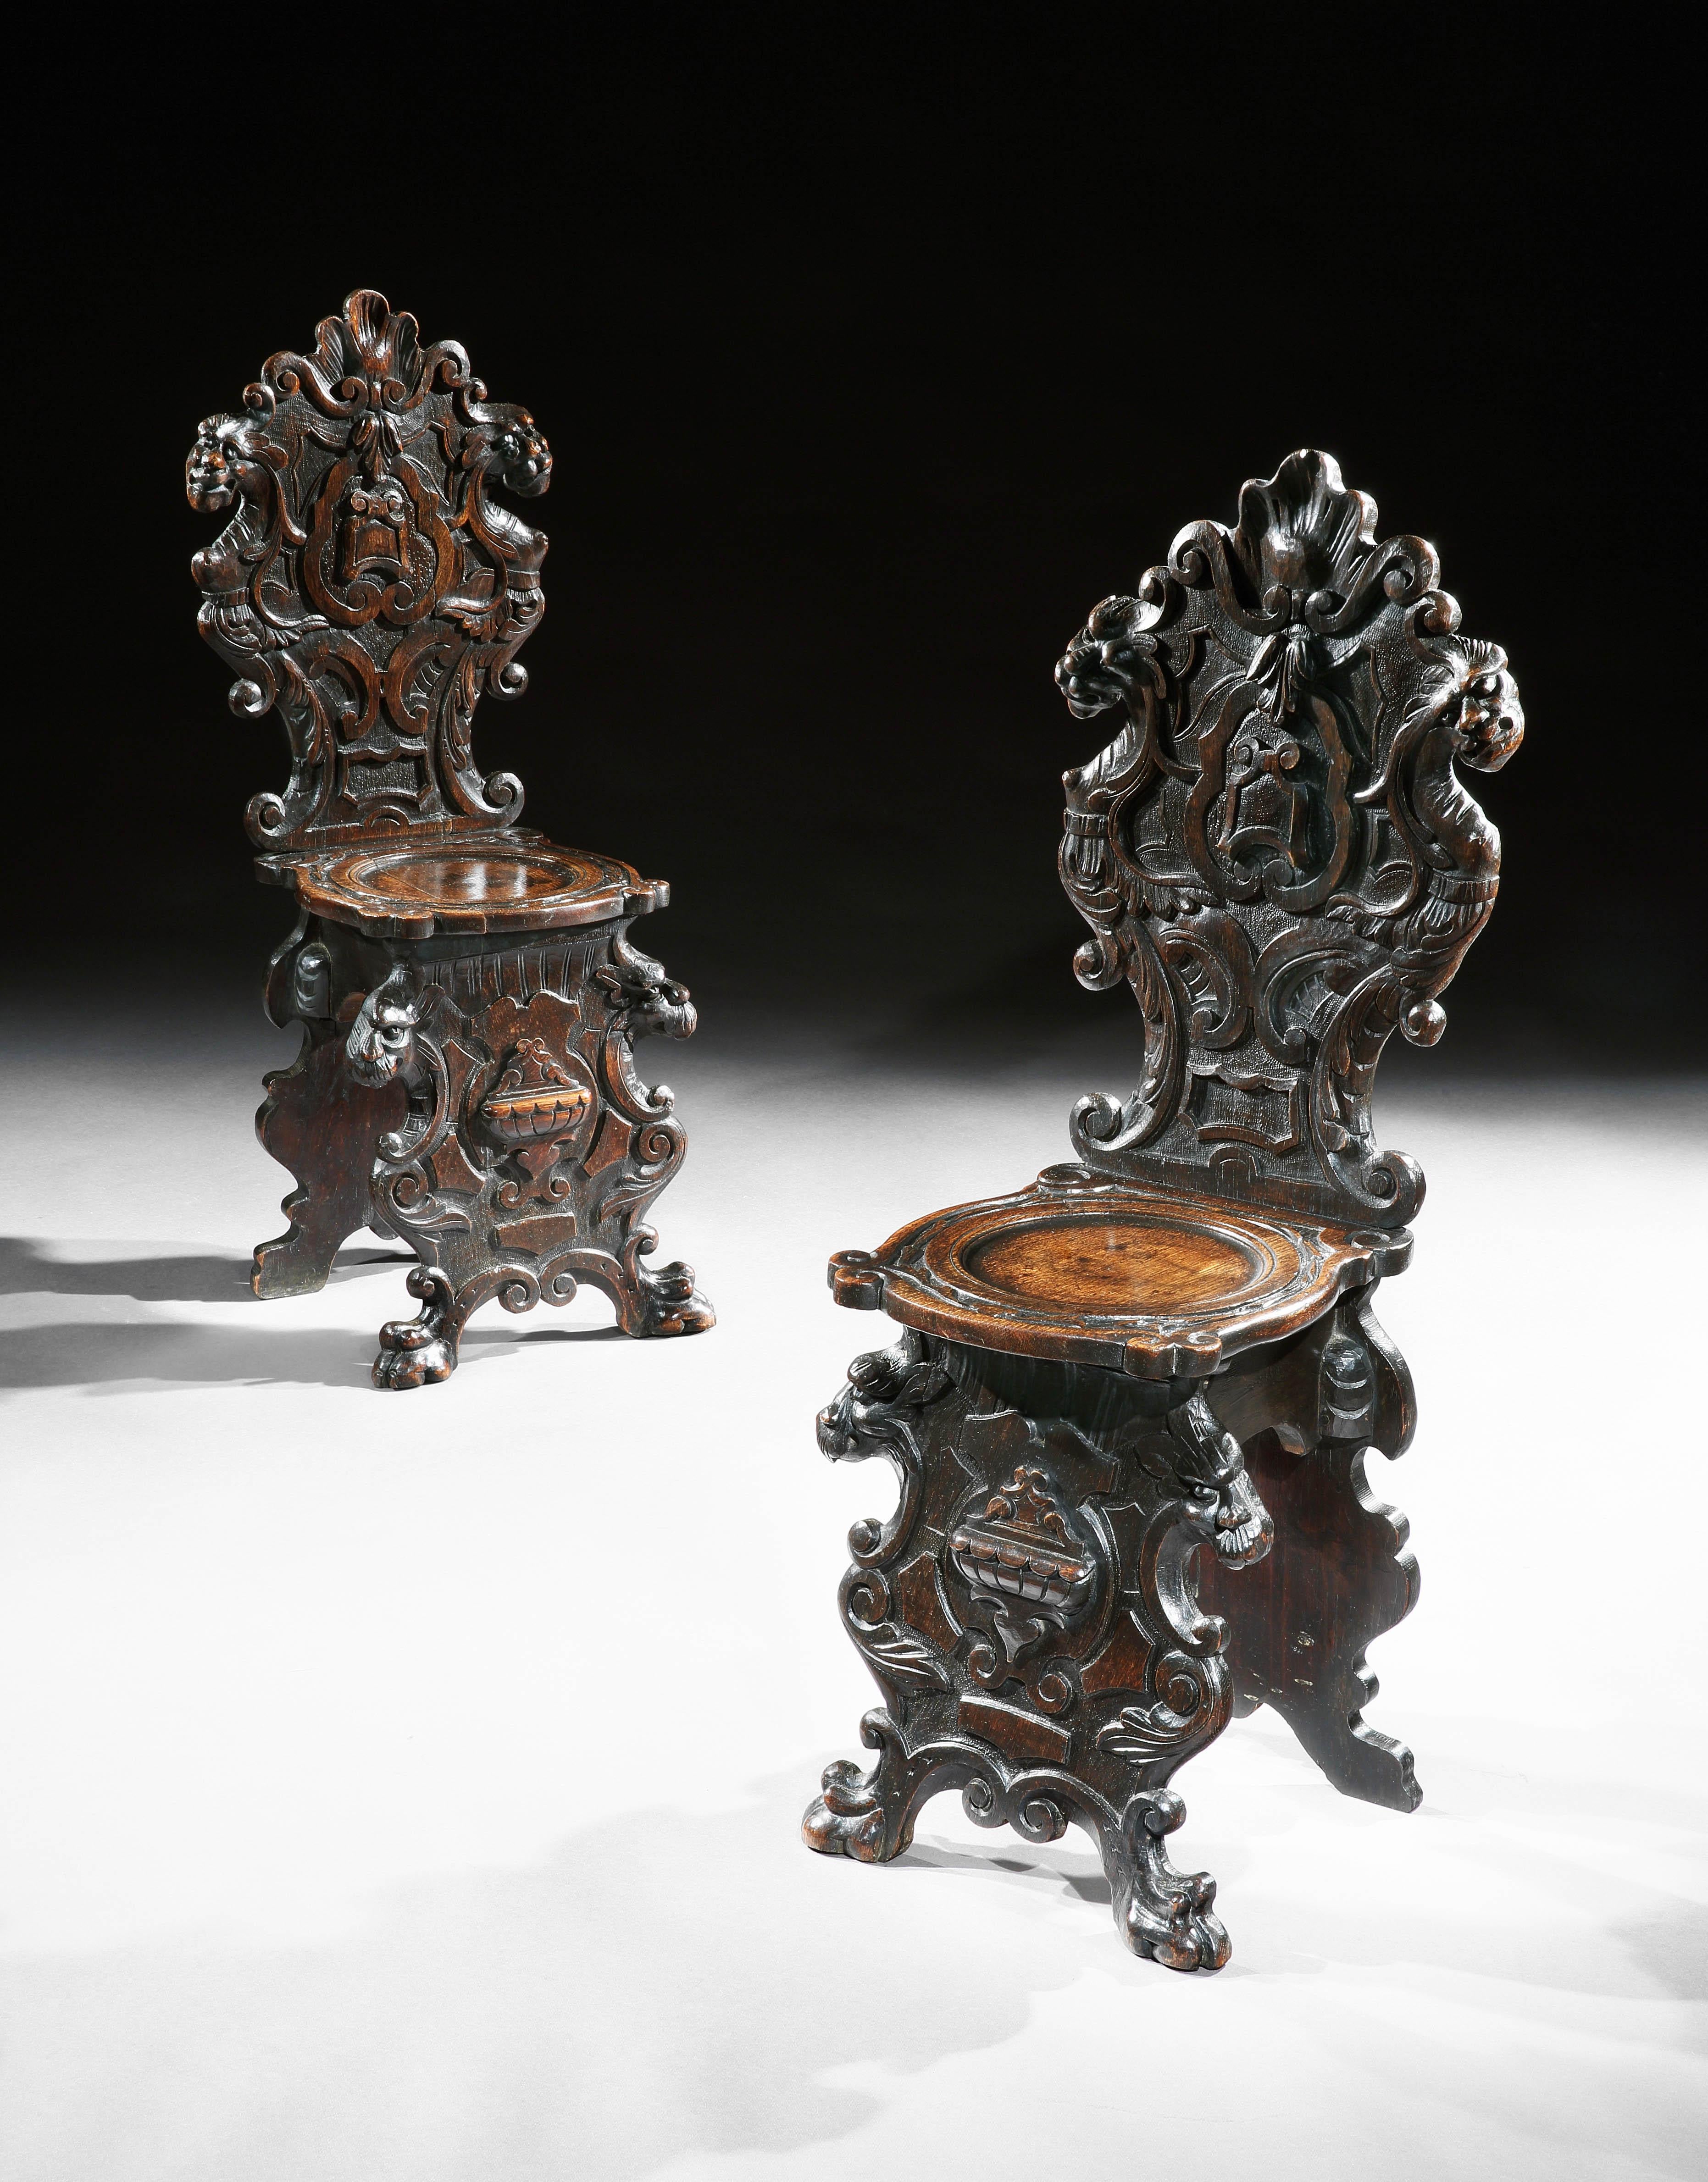 - The design and detailing of these exhuberant backstools demonstrate why Italian Renaissance furniture was as highly prized as old-master paintings.
- This design was associated with Venice and the design was disseminated throughout Europe in the